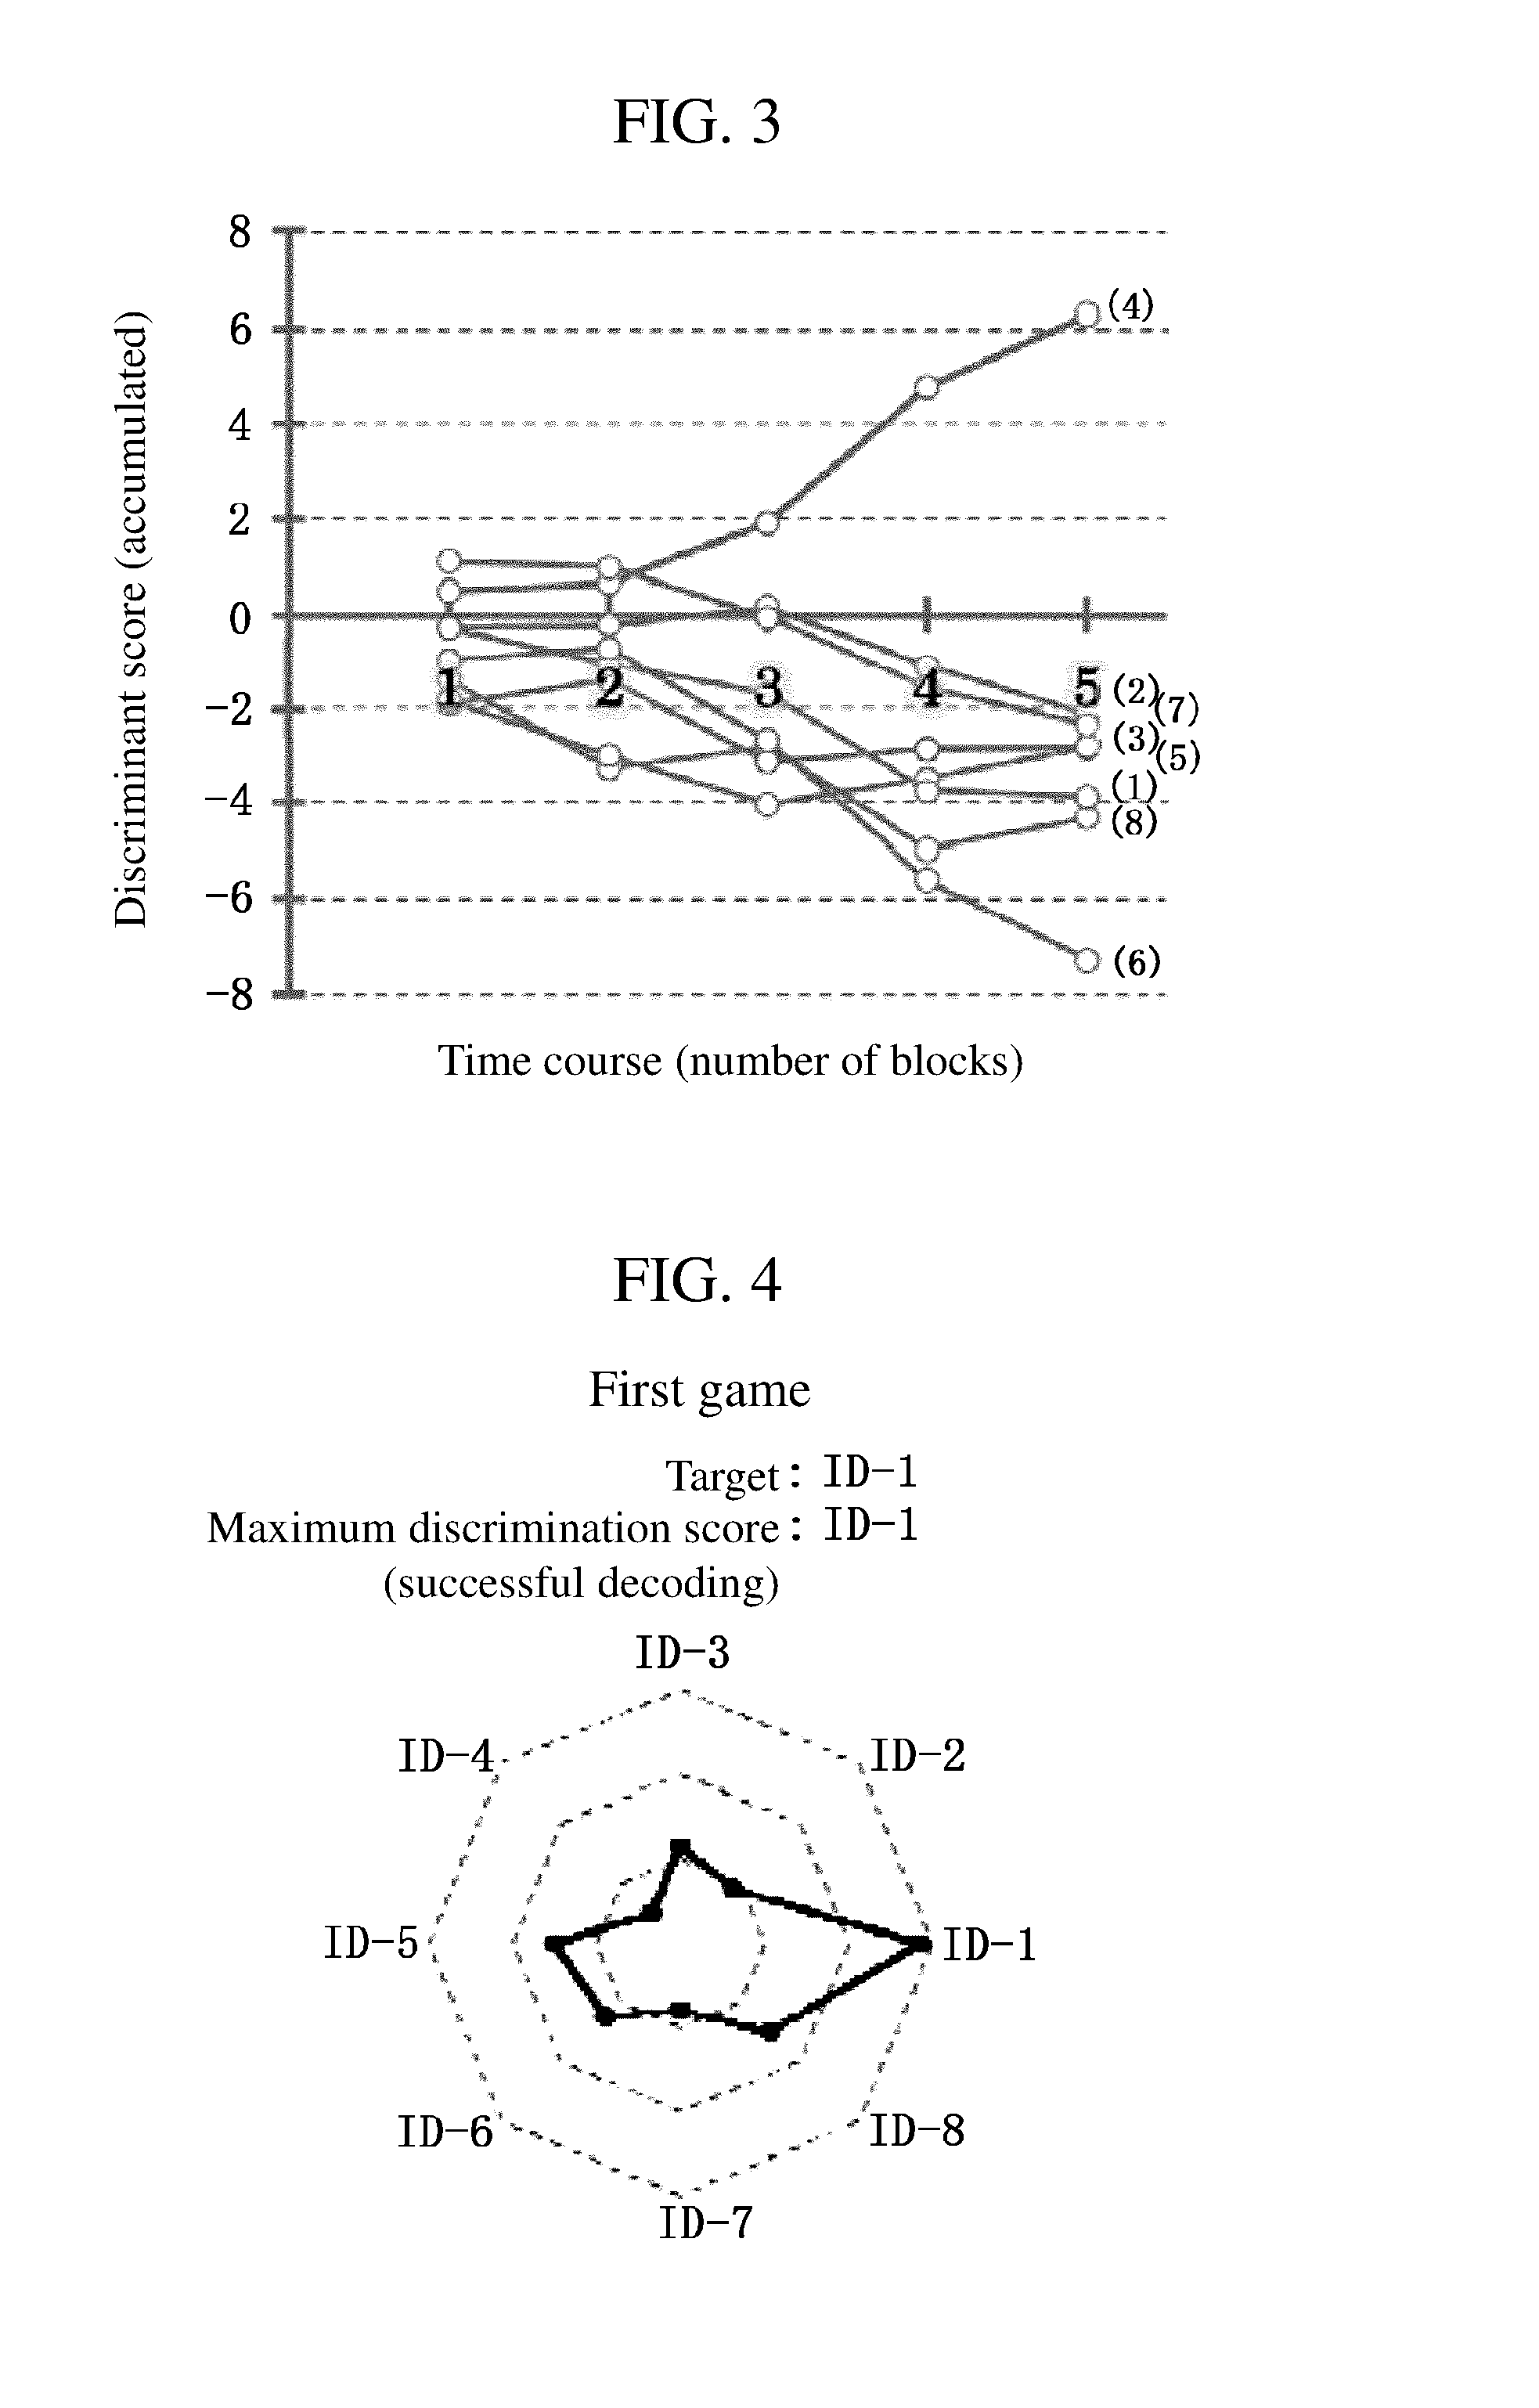 Cognitive function evaluation apparatus, method, system and program